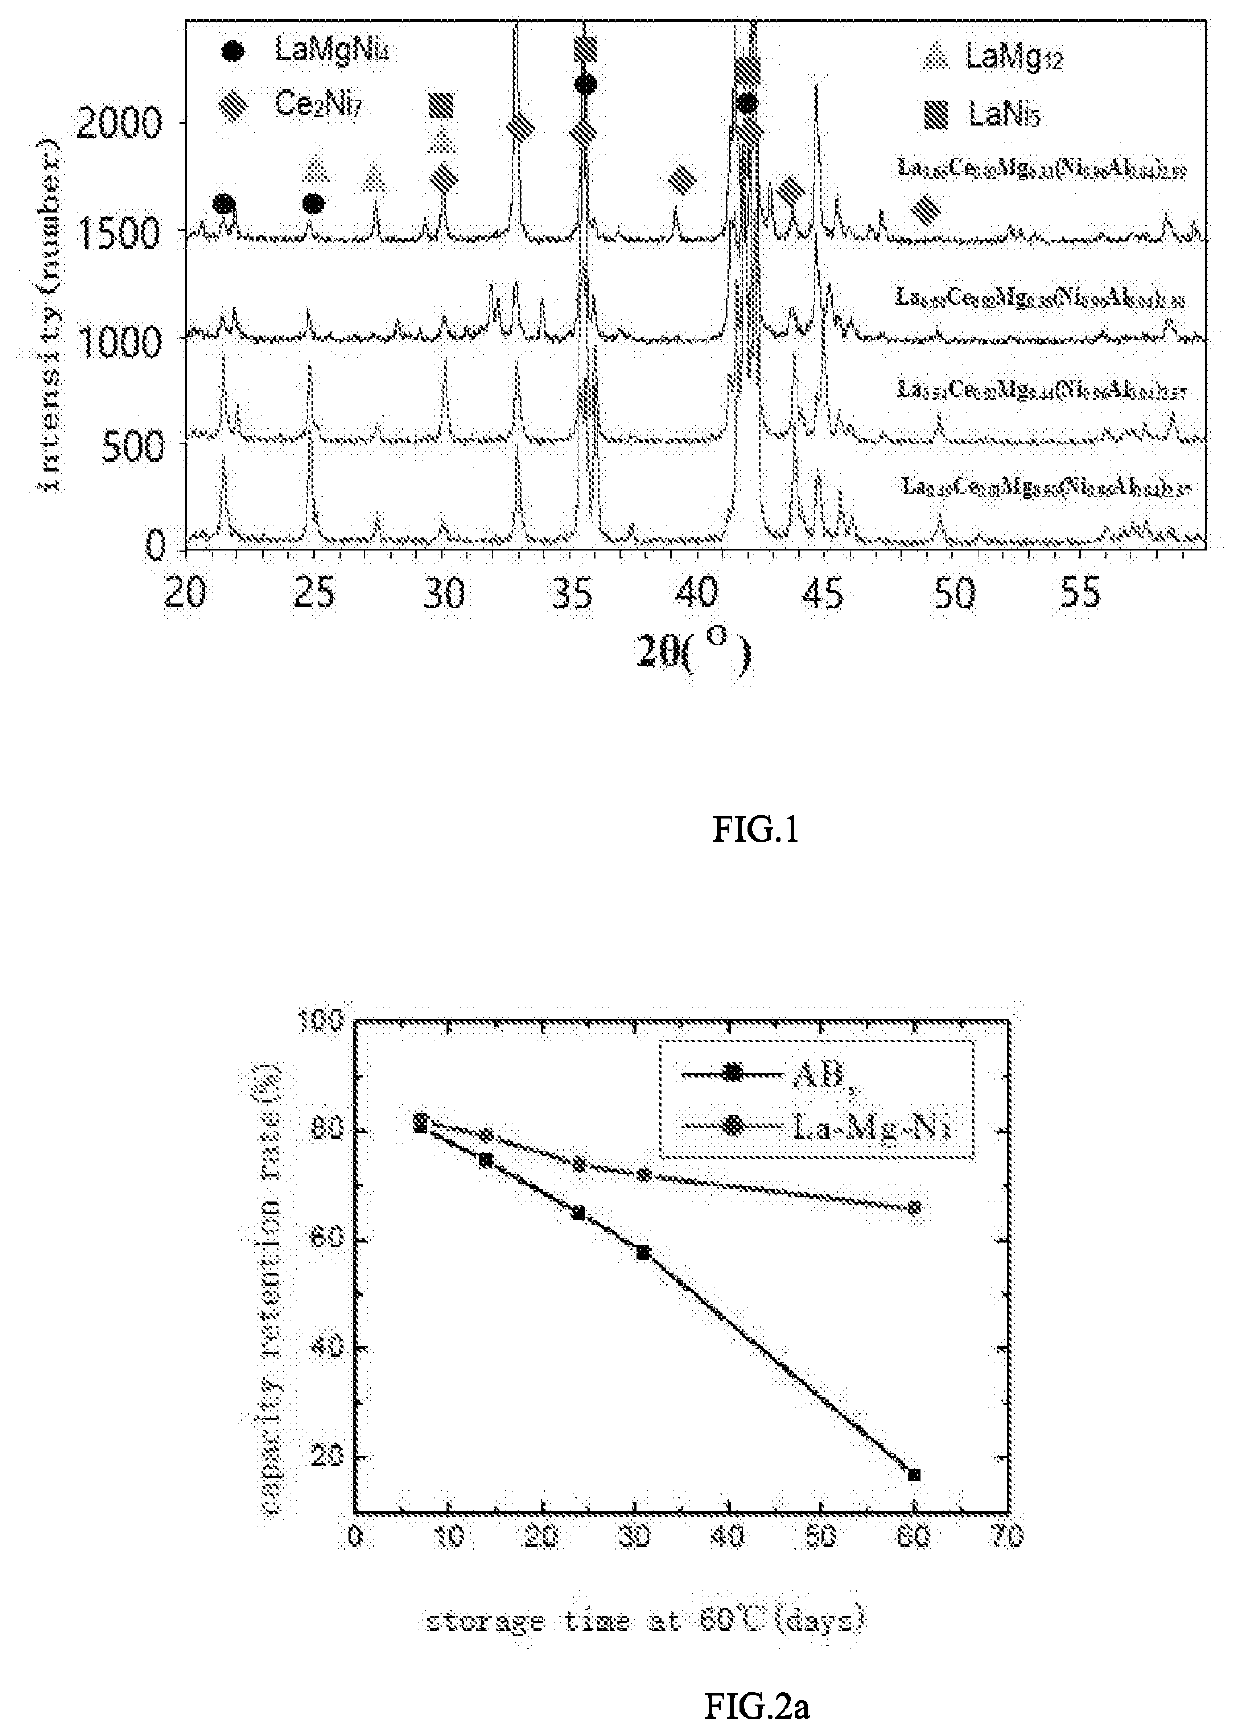 HIGH-CAPACITY AND LONG-LIFE NEGATIVE ELECTRODE HYDROGEN STORAGE MATERIAL OF La-Mg-Ni TYPE FOR SECONDARY RECHARGEABLE NICKEL-METAL HYDRIDE BATTERY AND METHOD FOR PREPARING THE SAME